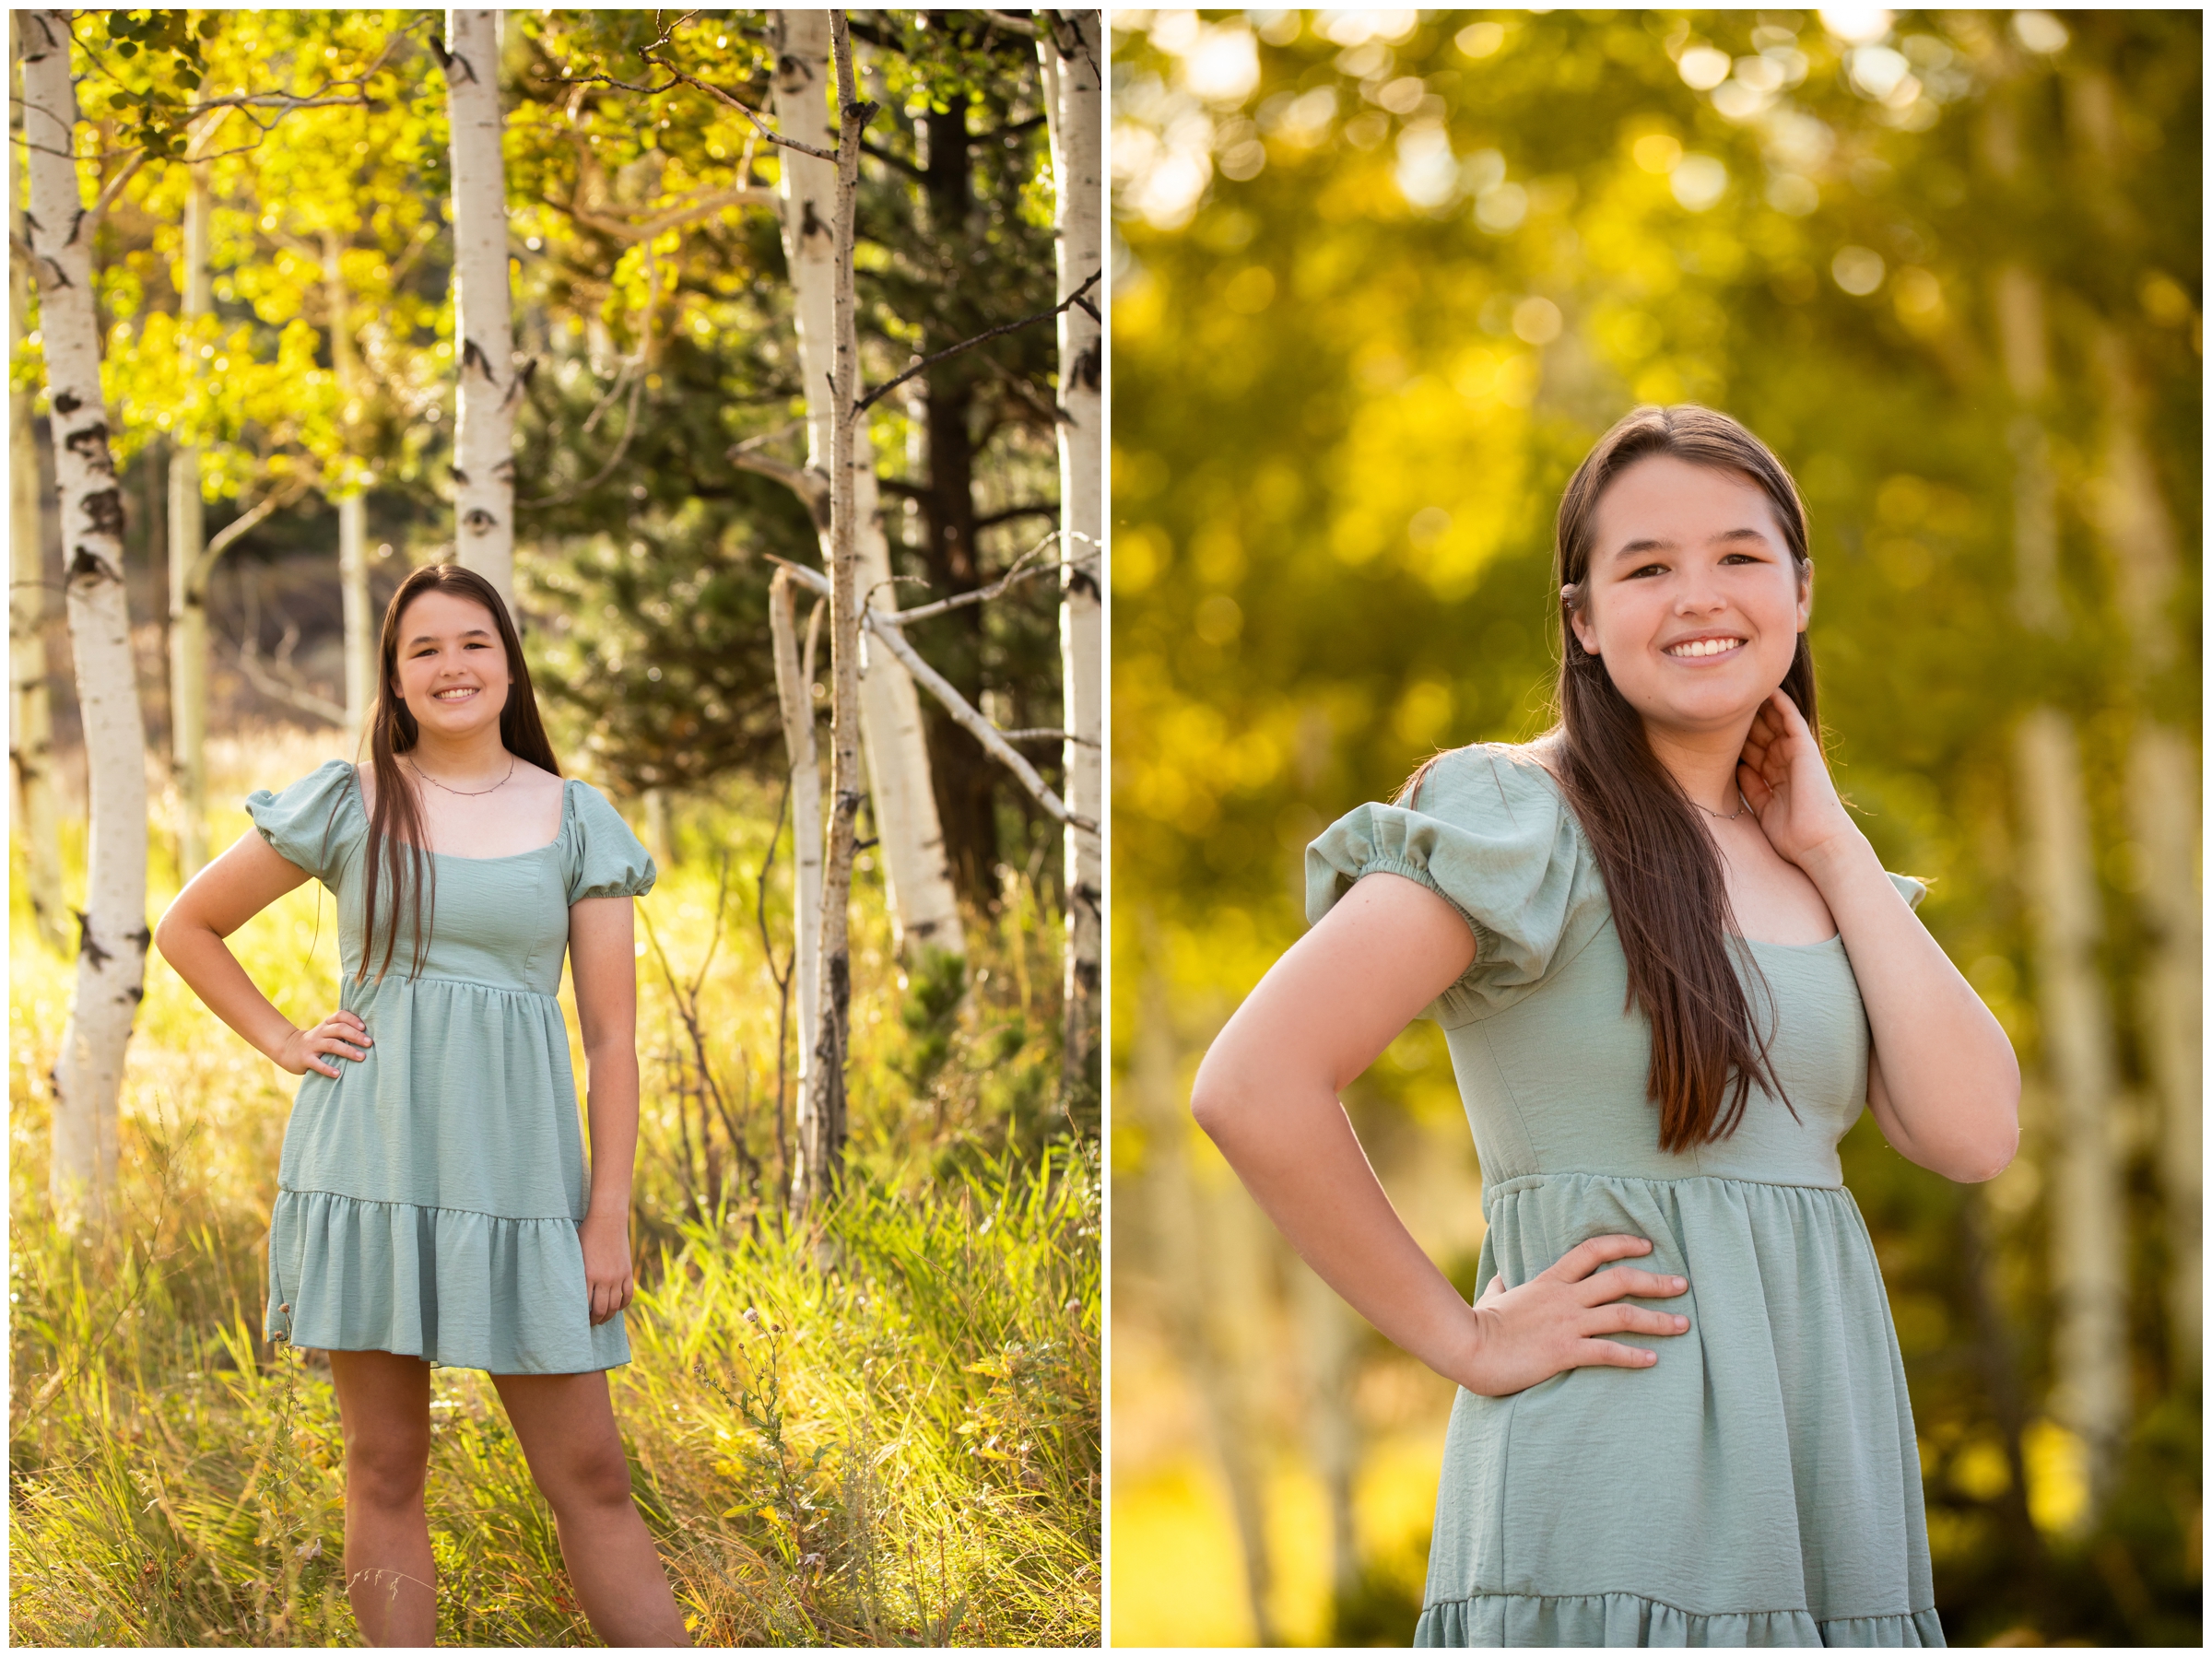 fall high school graduation photography session in the Colorado mountains by Plum Pretty Photography 